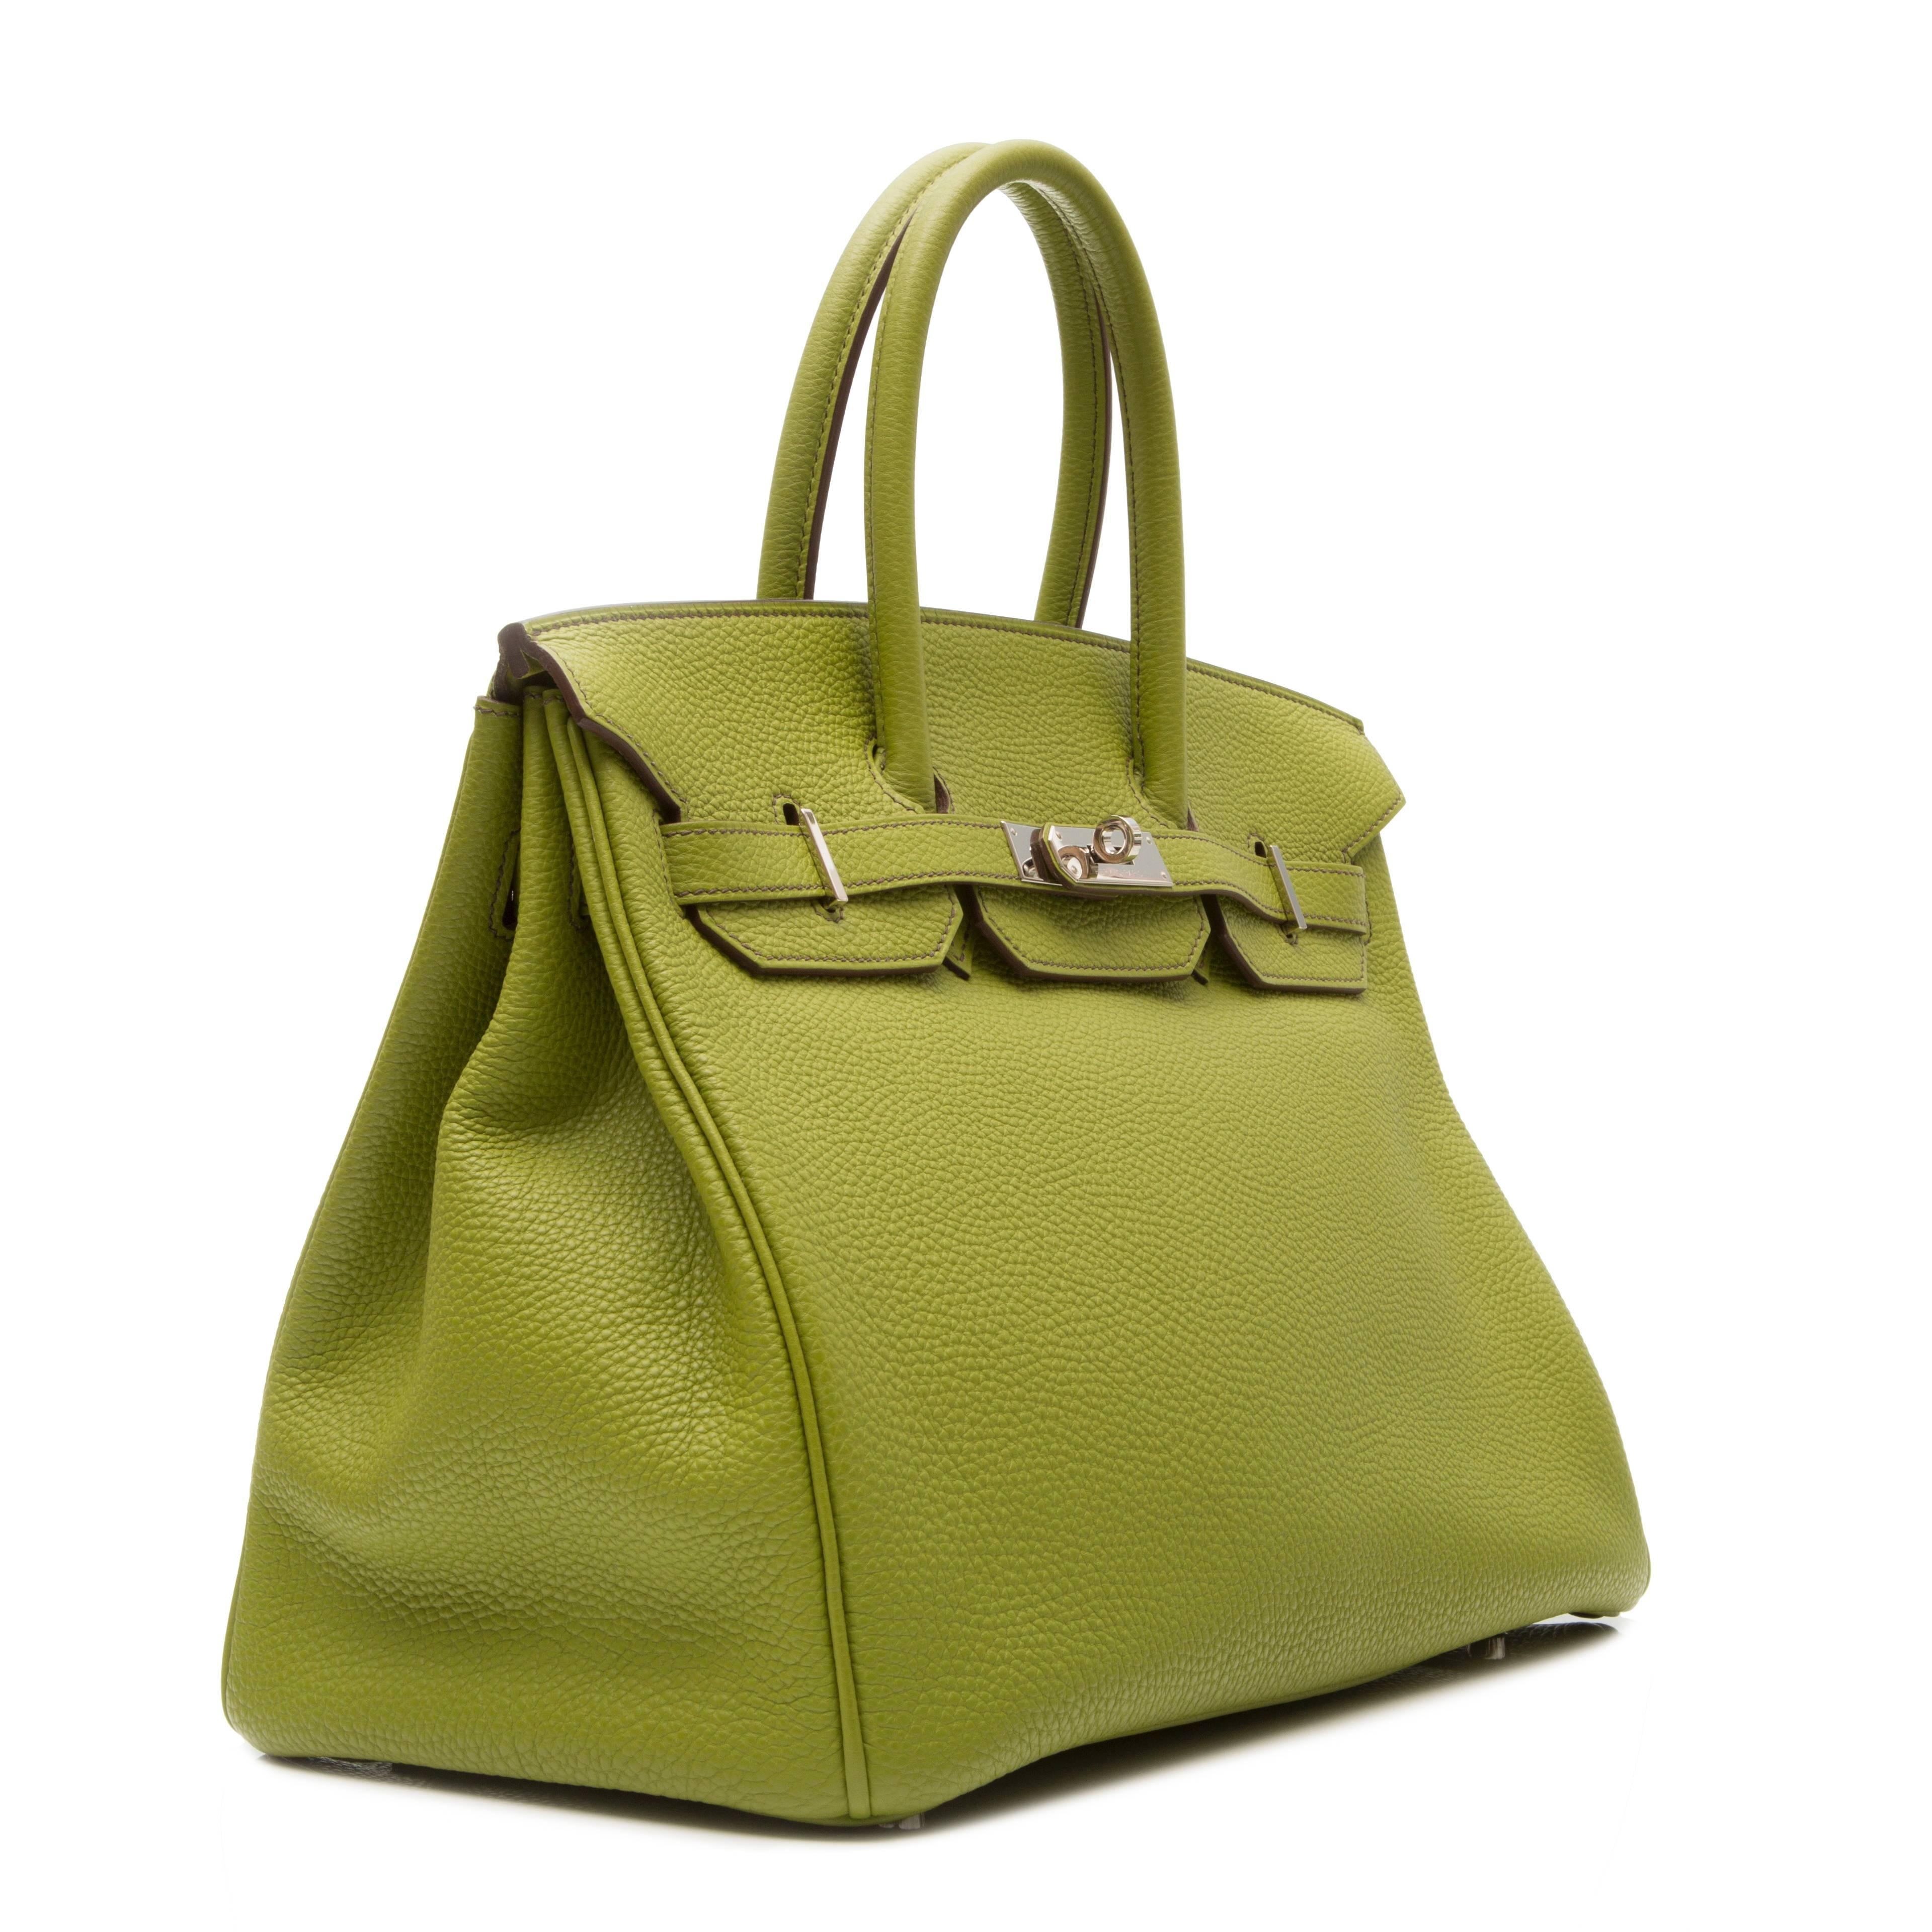 Green leather 'Birkin' tote featuring a trapeze body, round top handles, foldover top with twist-lock closure, a pebbled leather texture, silver-tone hardware, a padlock fastening detail, a hanging key fob, an internal zipped pocket and purse feet.